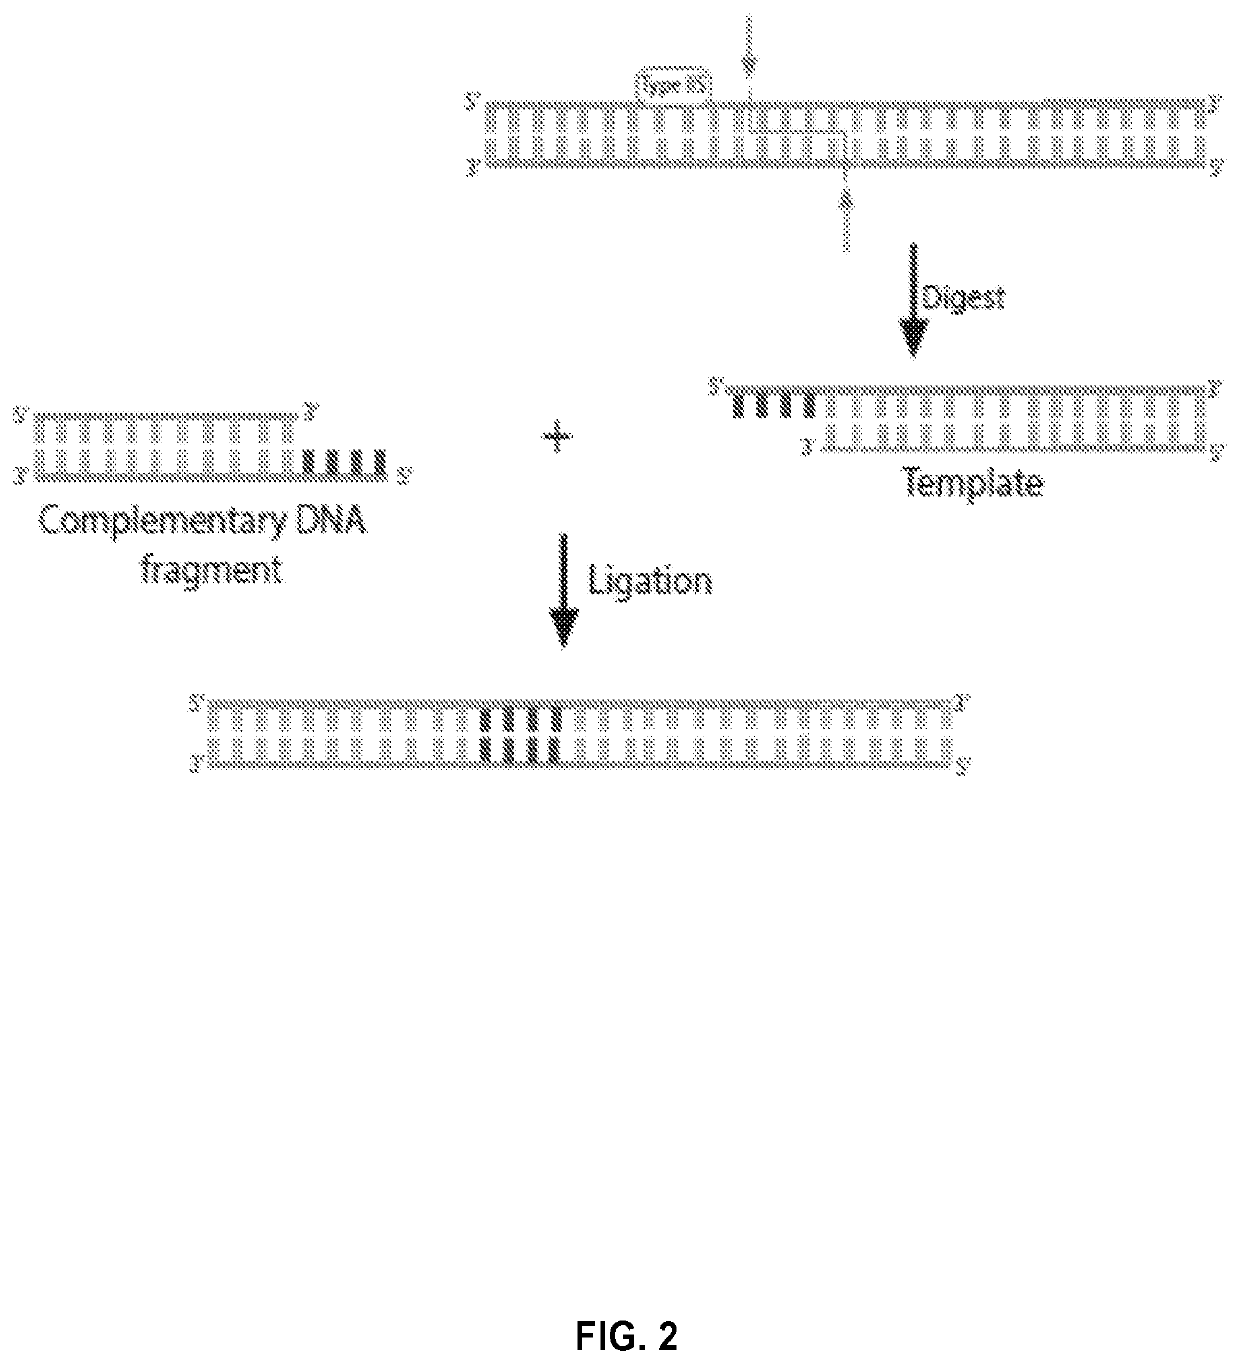 Novel systems, methods and compositions for the direct synthesis of sticky ended polynucleotides